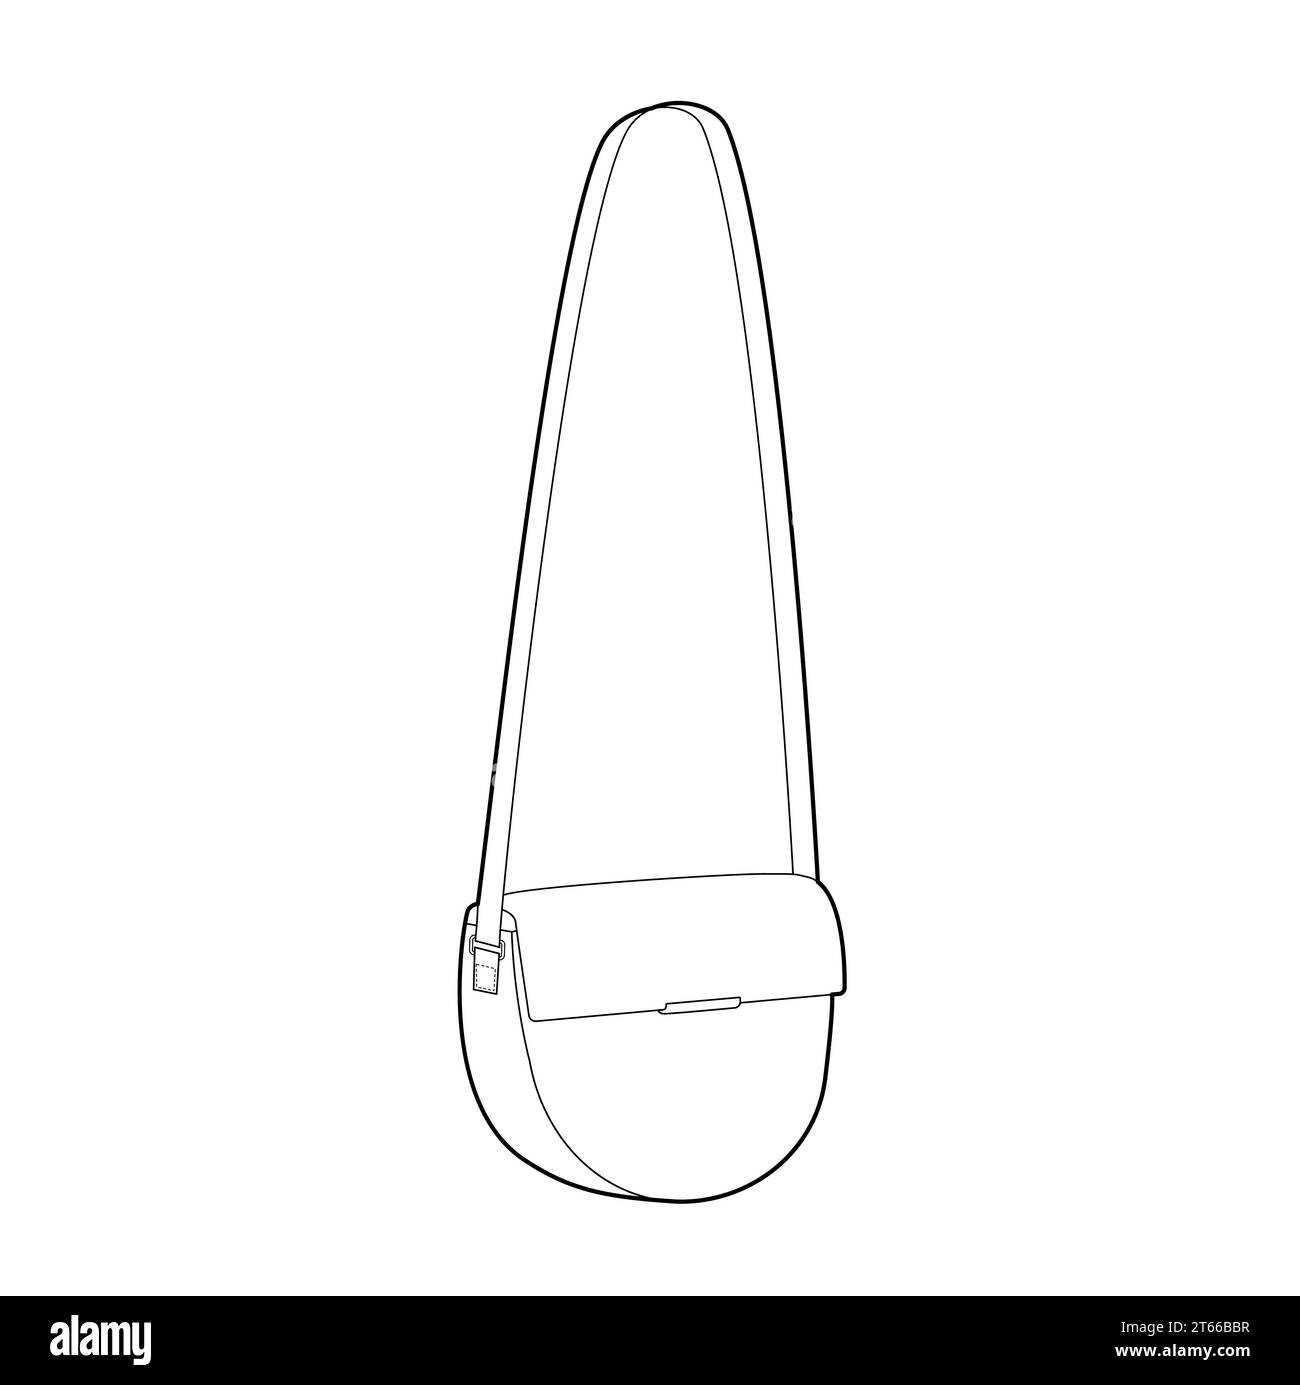 Saddle Cross-Body Bag with curved lines. Fashion accessory technical illustration. Vector satchel front 3-4 view for Men, women, unisex style, flat handbag CAD mockup sketch outline isolated Stock Vector